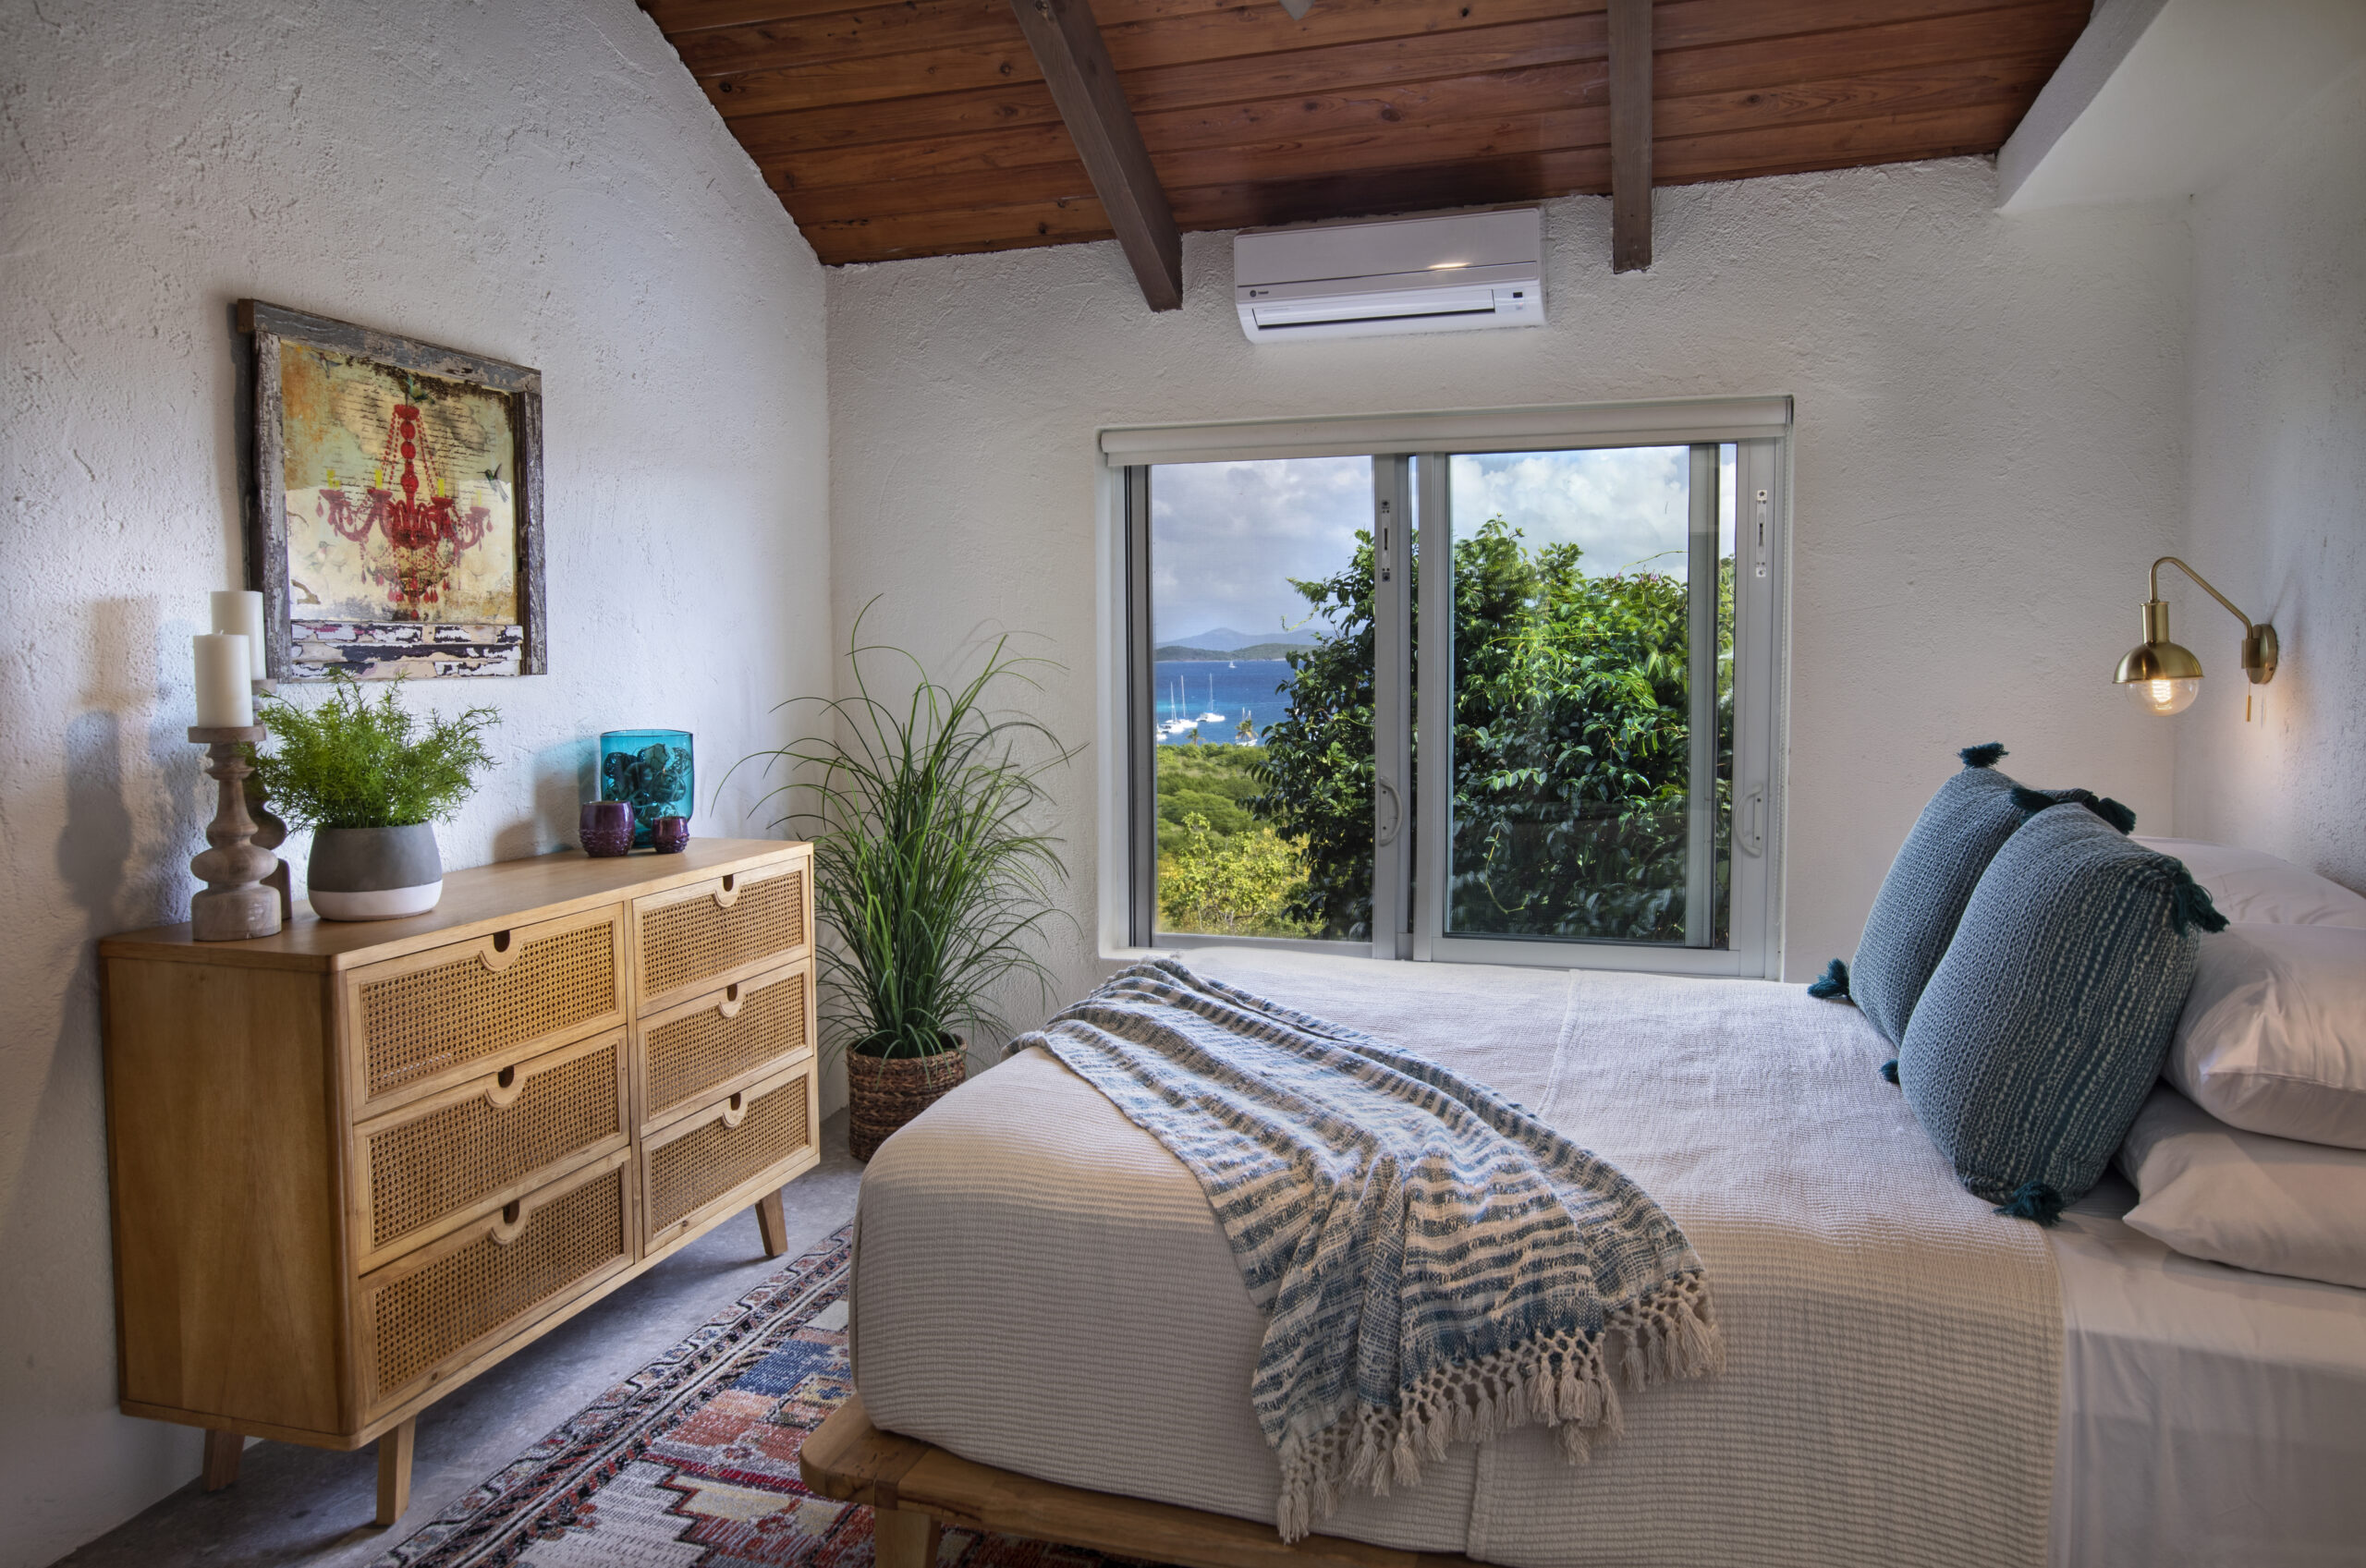 Island Vacation Rental Bedroom Design with a view